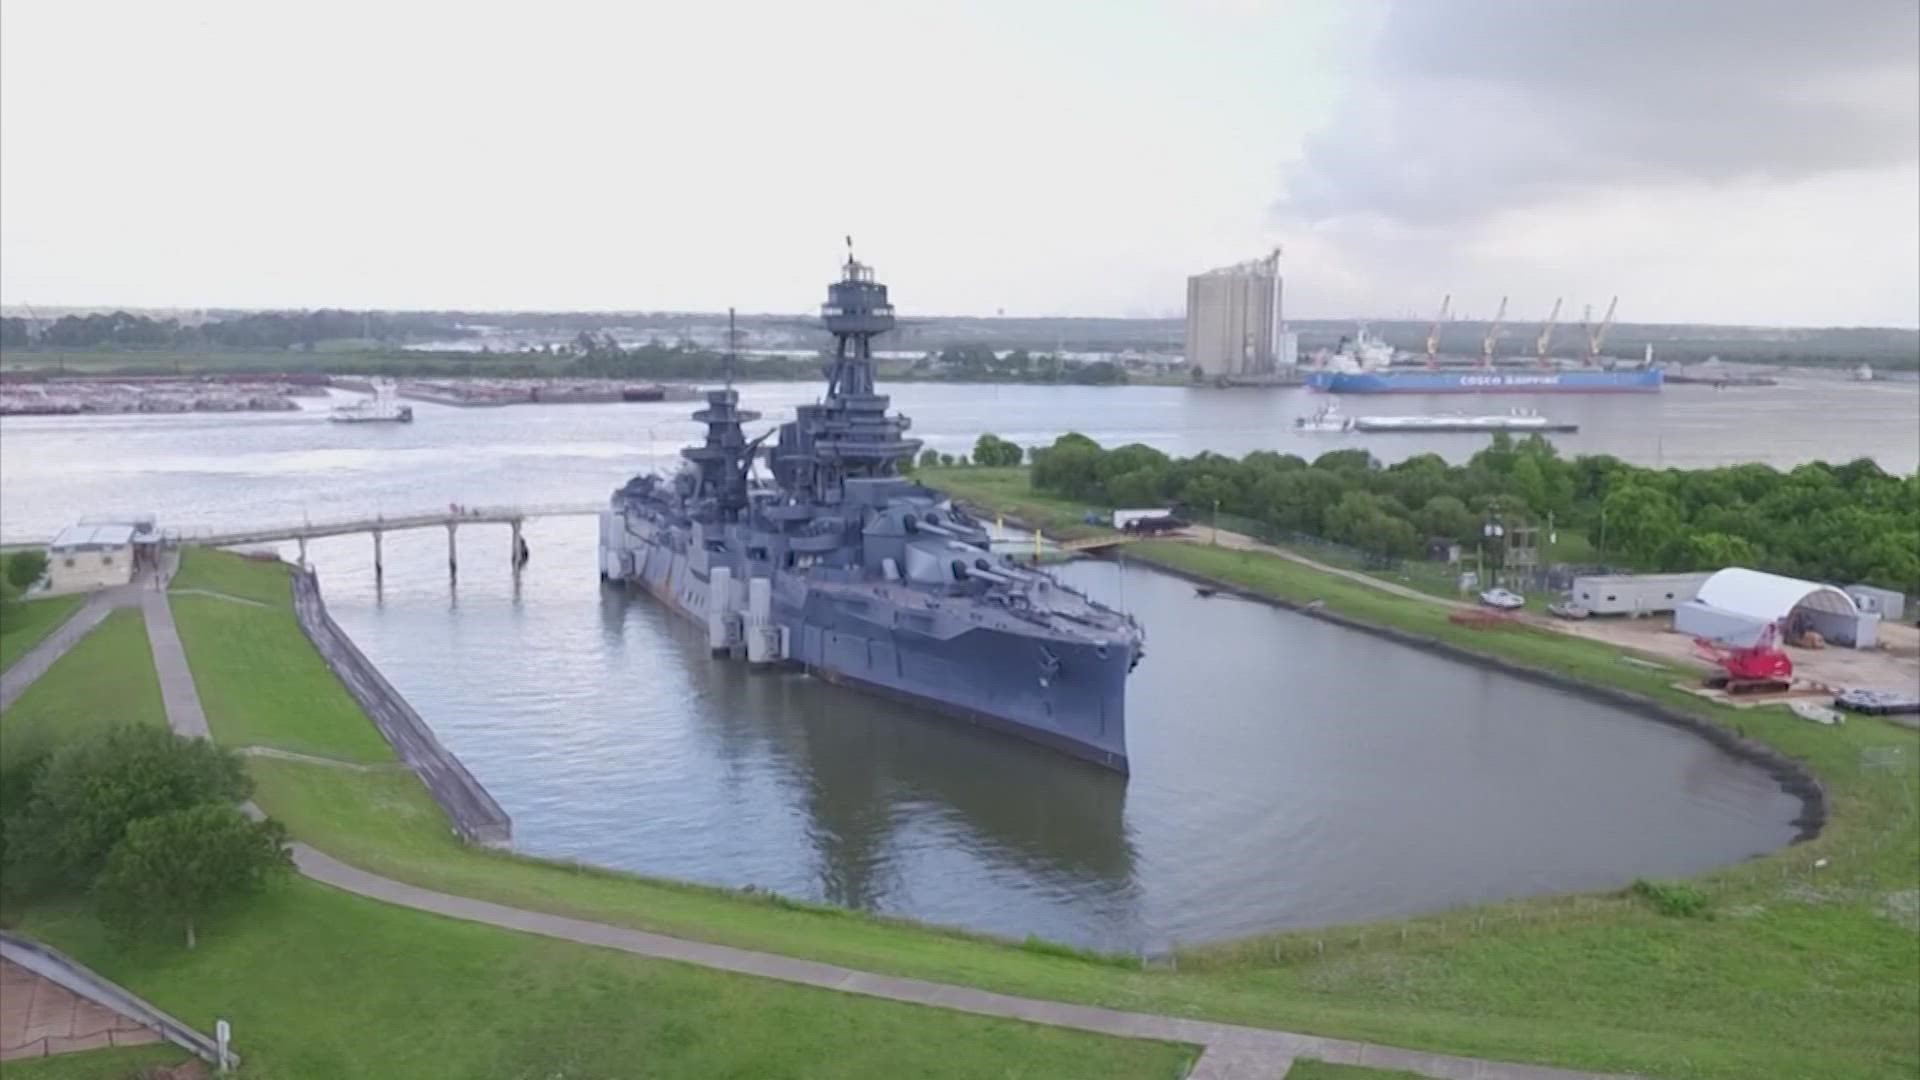 The historic Texas Battleship is docked at the San Jacinto Battleground Historic Site in La Porte and will finally get some much-needed repairs in Galveston.